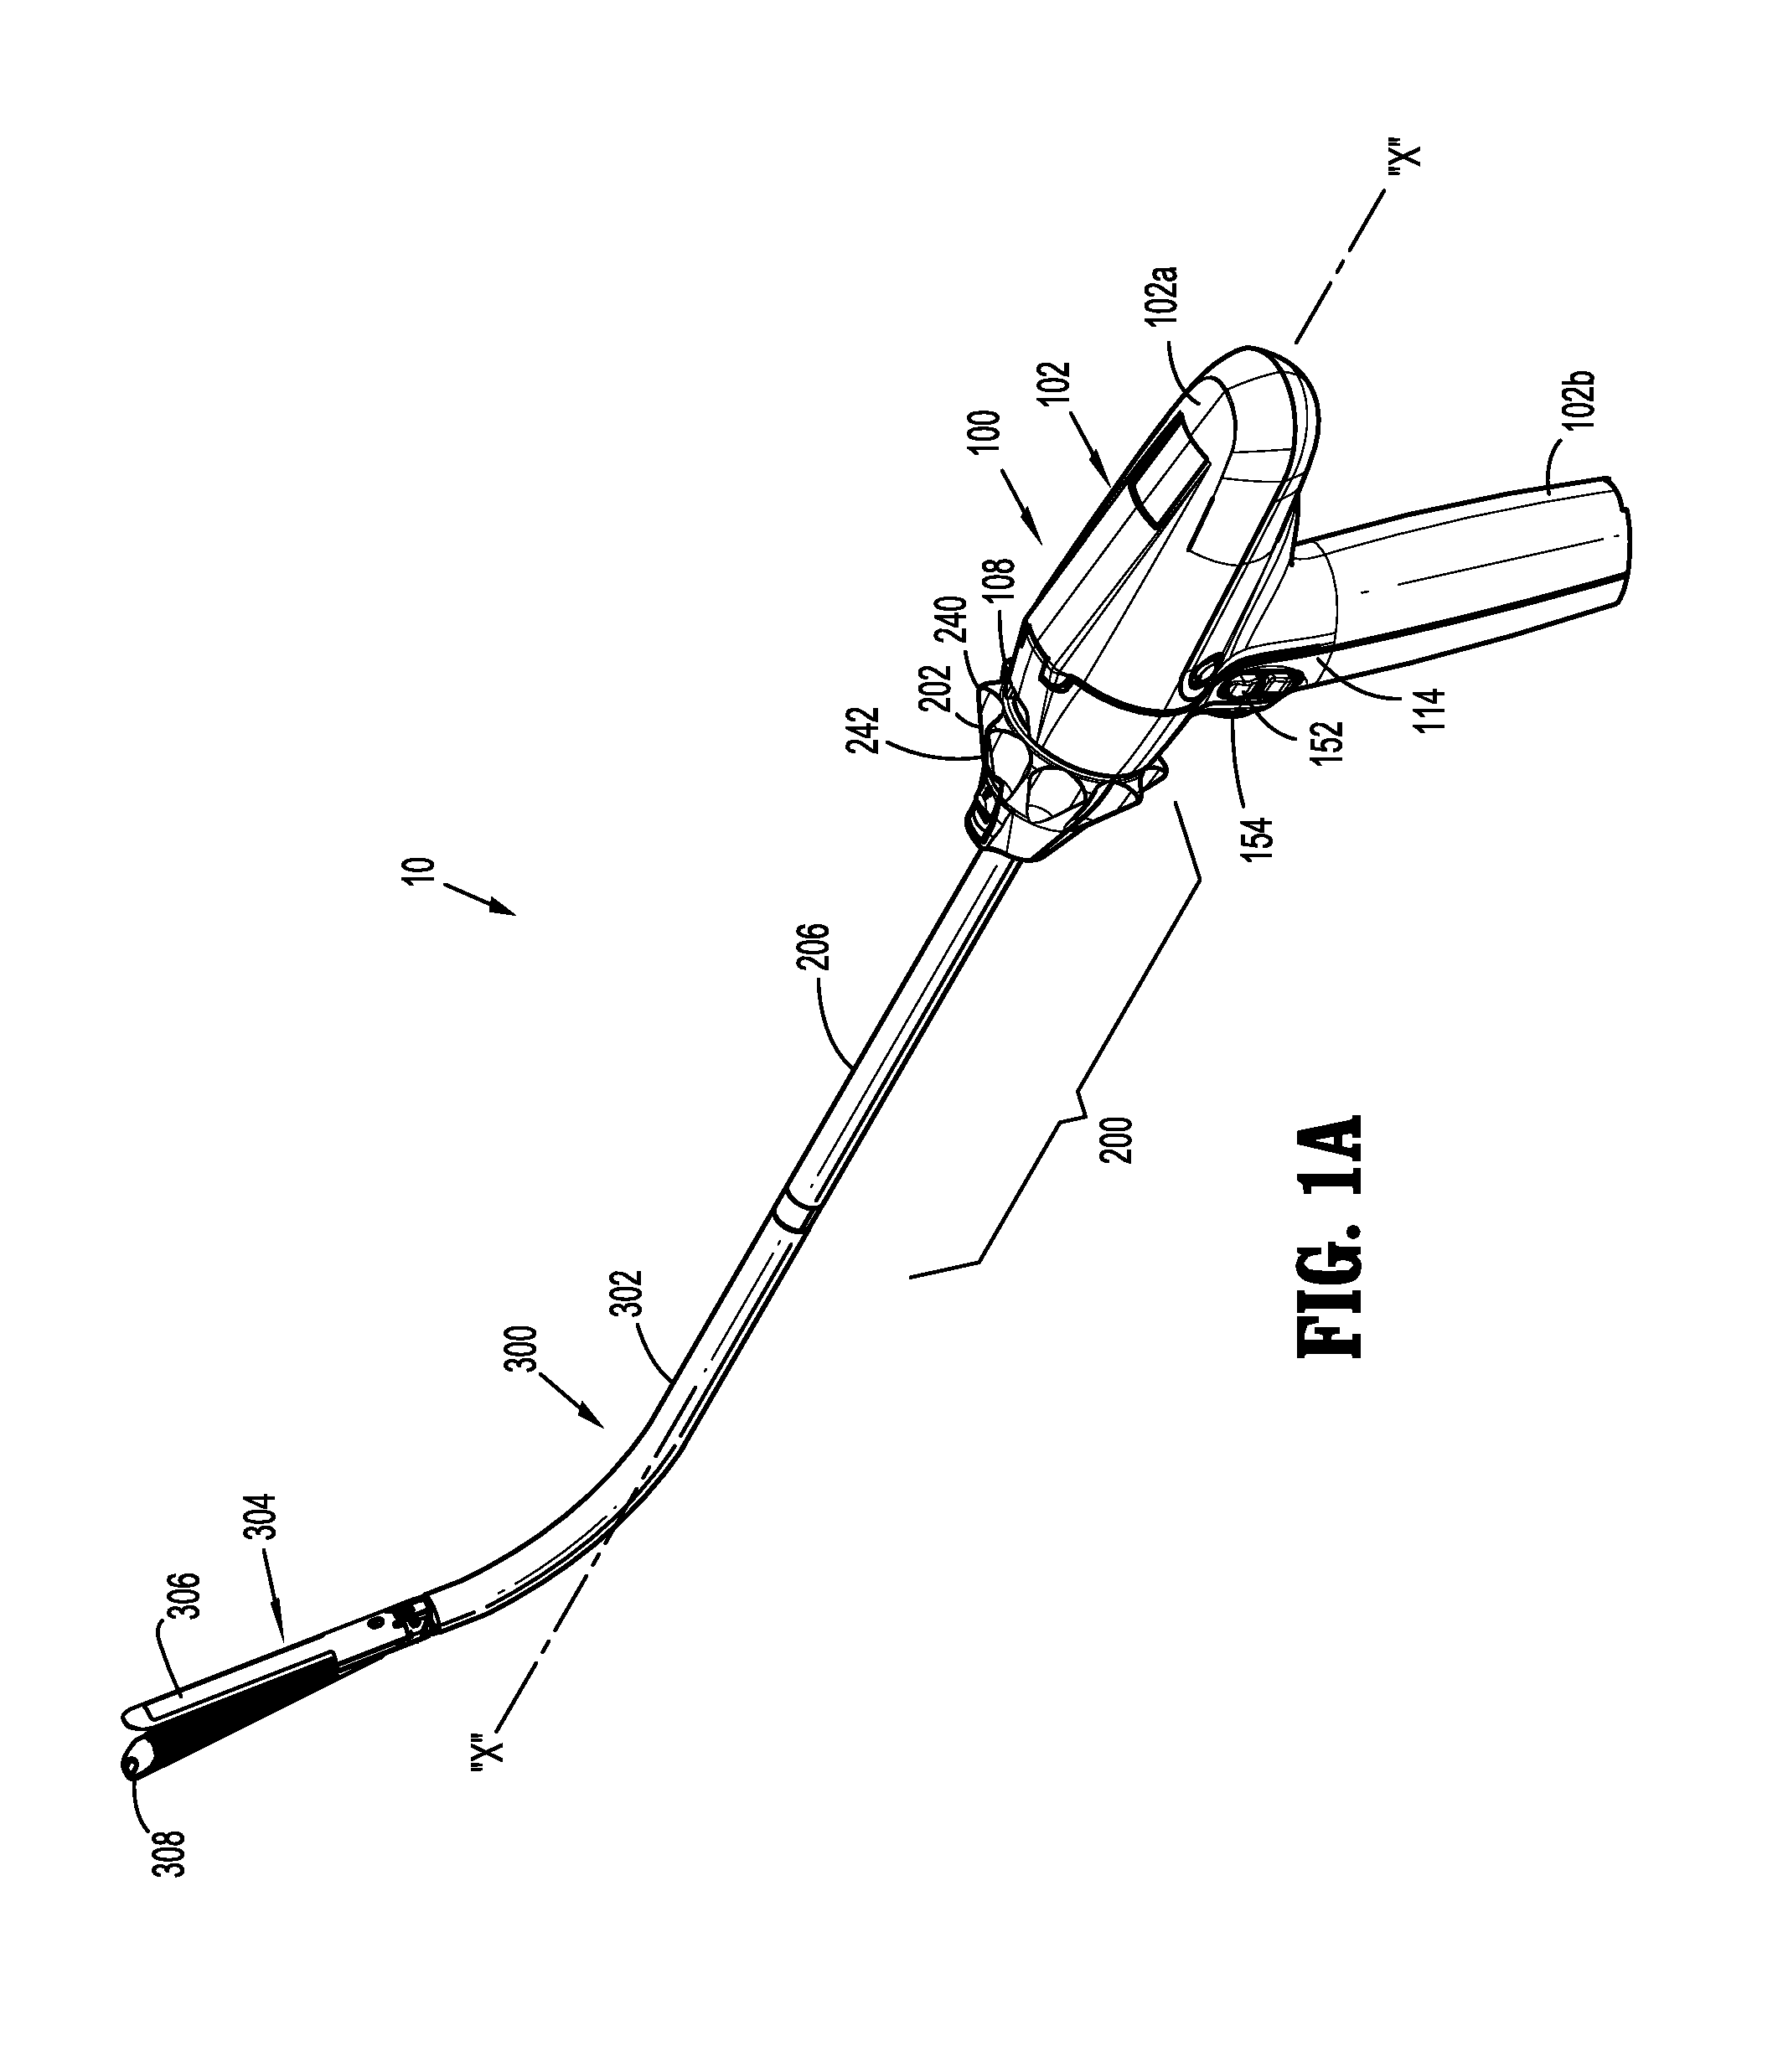 Adapter assembly for interconnecting surgical devices and surgical attachments, and surgical systems thereof